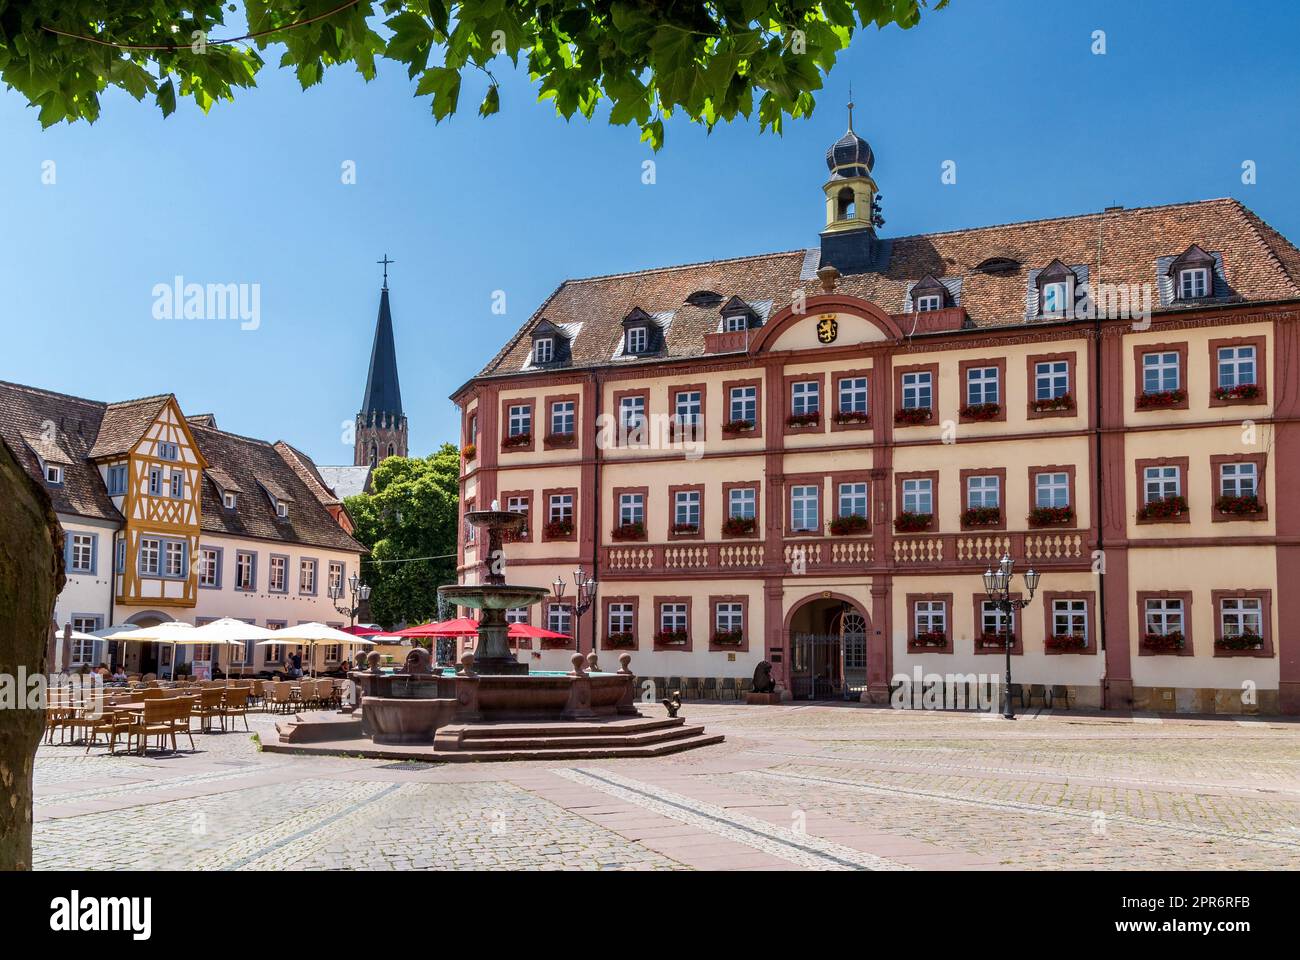 Old town hall and market square of Neustadt an der Weinstraße in the state of Rhineland-Palatinate in Germany Stock Photo